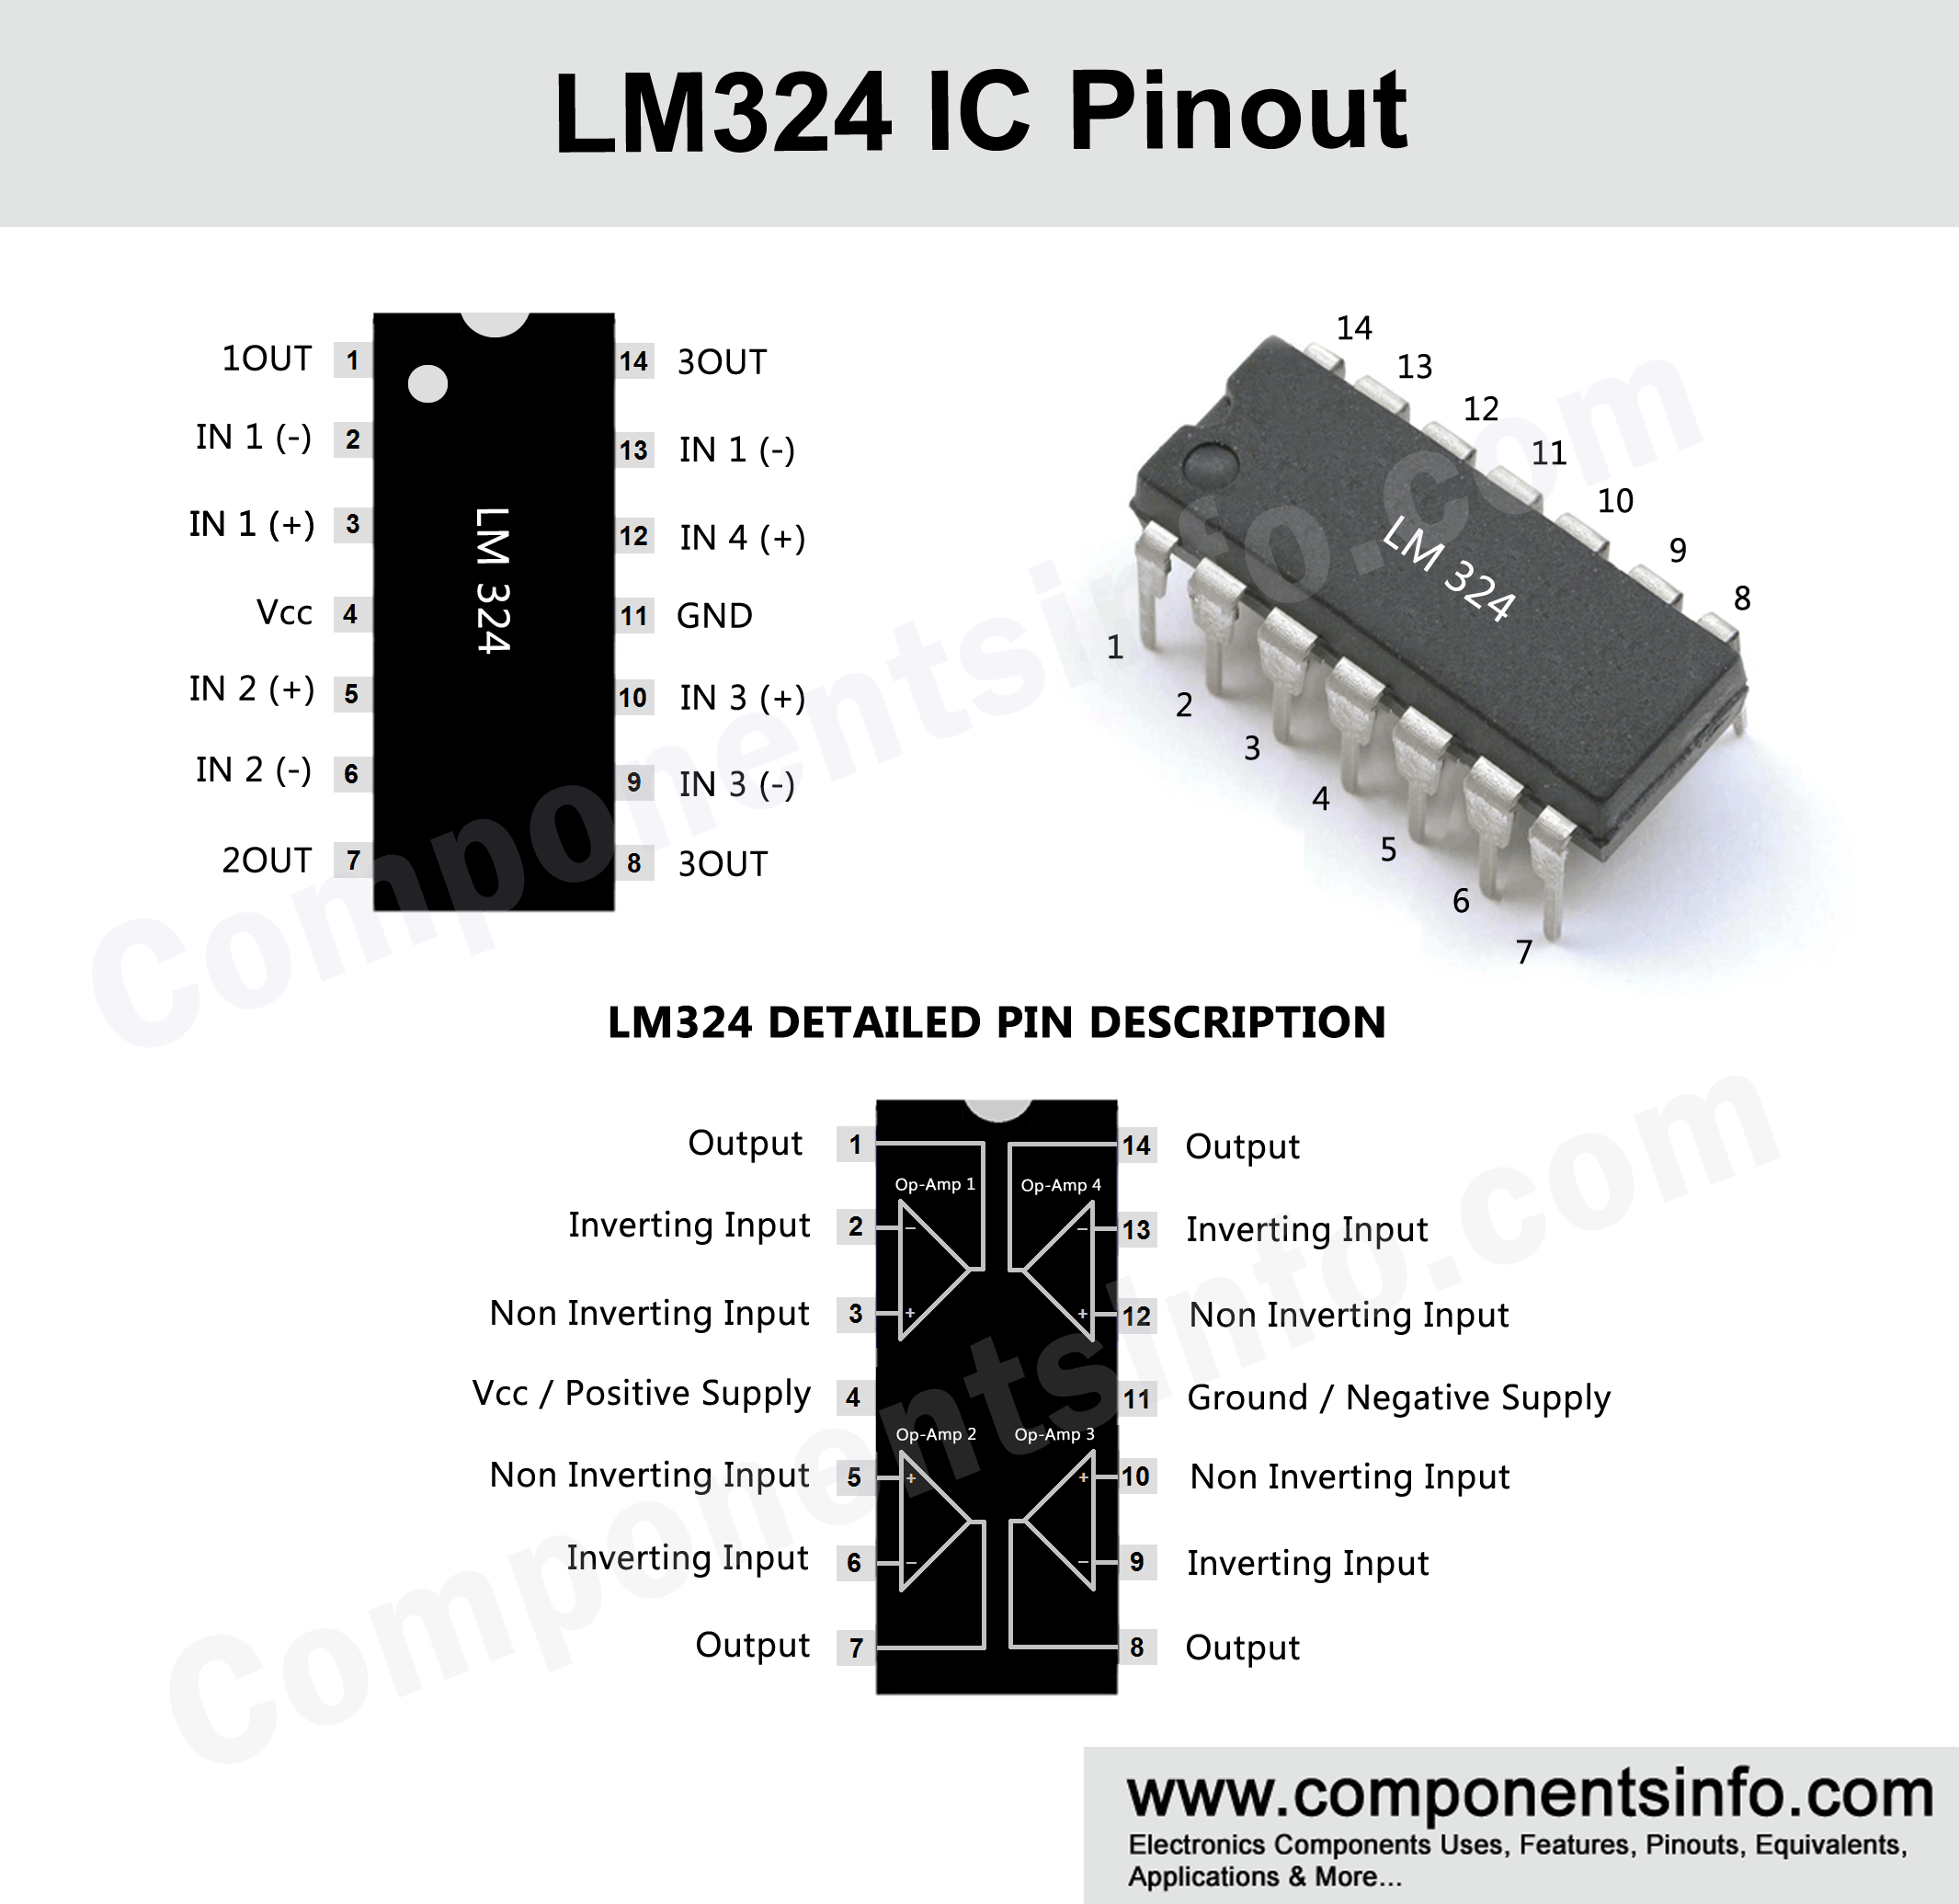 LM324 Pinout, Equivalent, Applications, Features & Datasheet